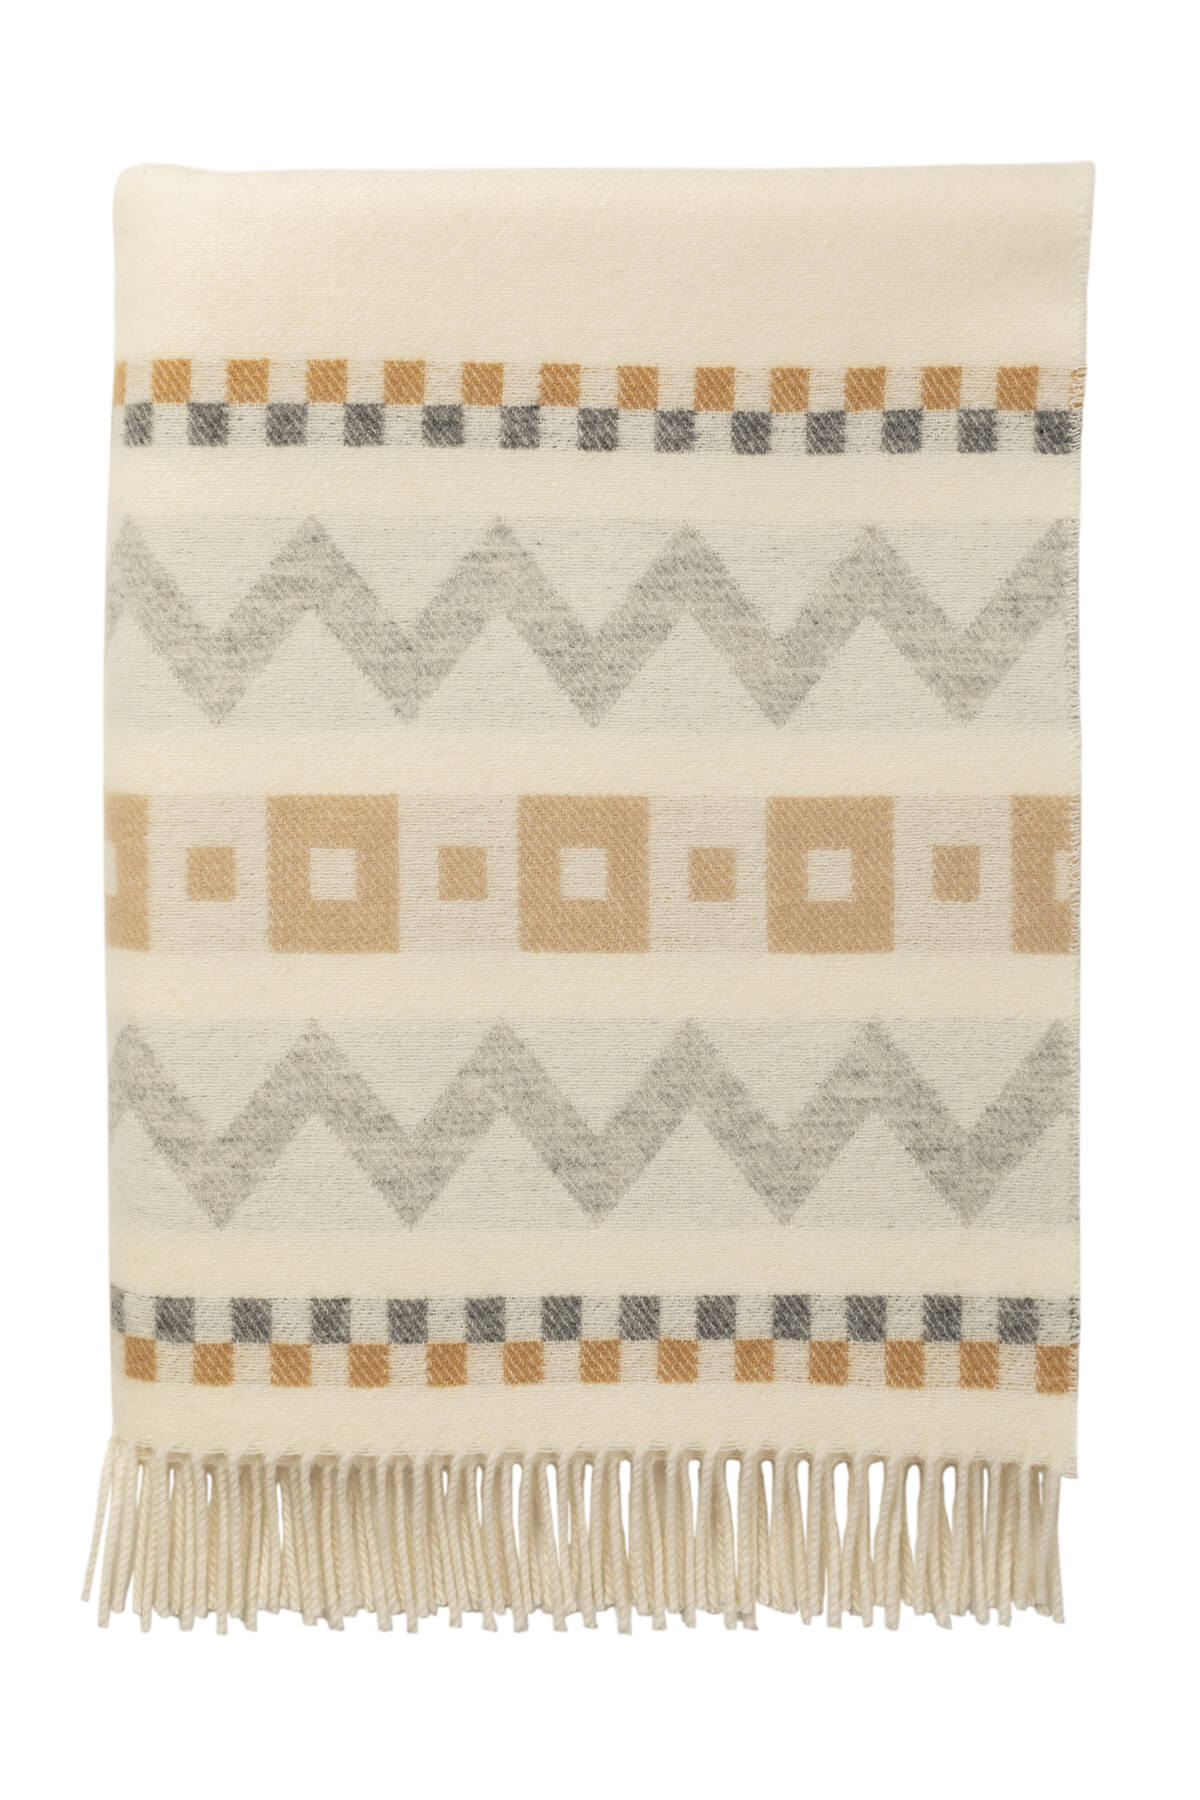 Folded Johnstons of Elgin Children's Zig Zag Blanket in shades of grey, camel, and cream on a white back ground. WB002334RU7278ONE